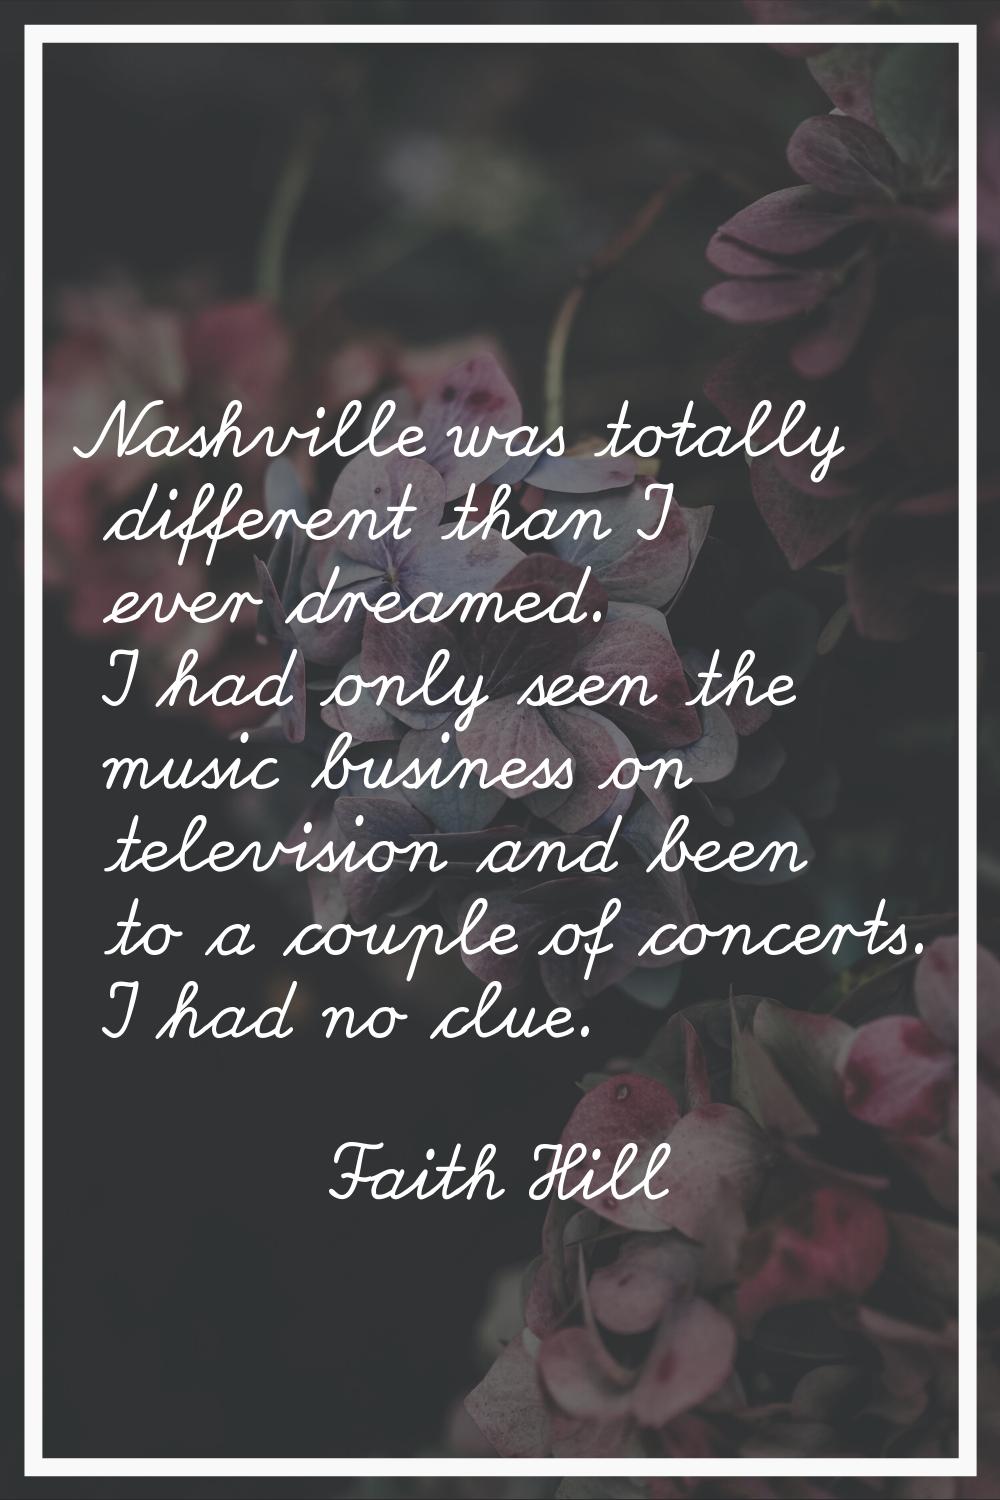 Nashville was totally different than I ever dreamed. I had only seen the music business on televisi